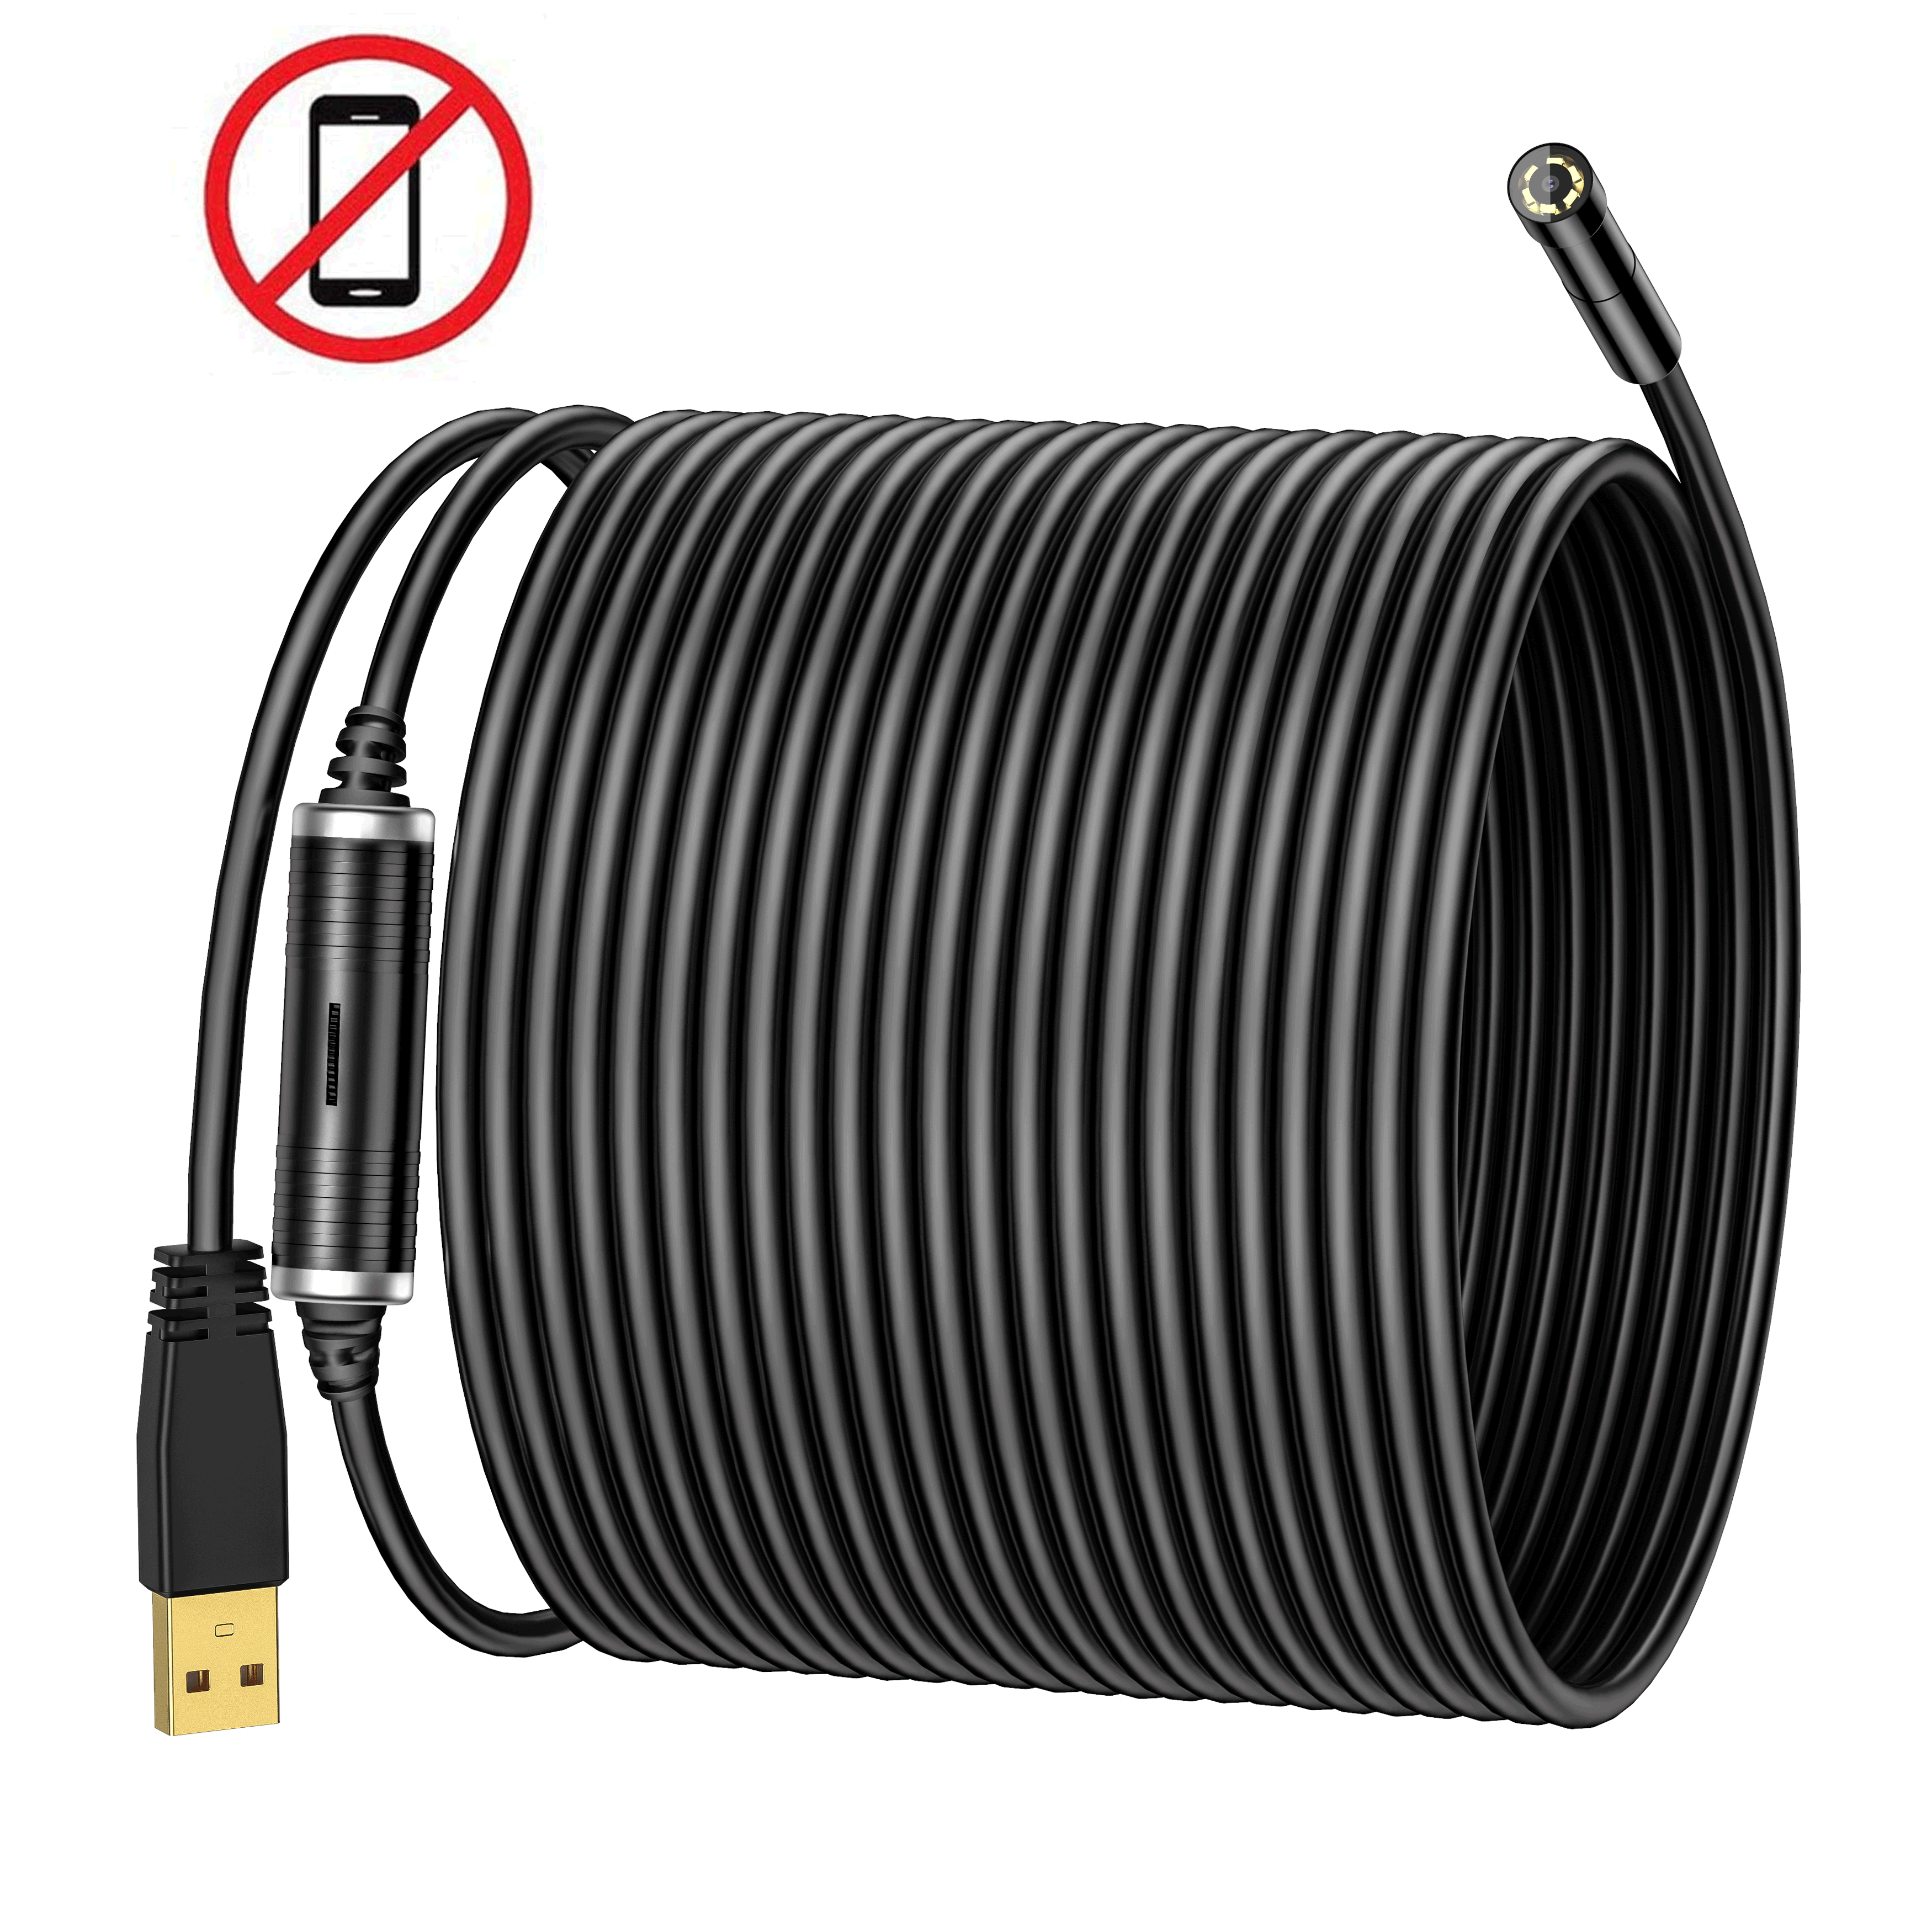 5.0MP USB Endoscope, 50FT 8.5mm Borescope, IP67 Waterproof Inspection Camera with Semi-Rigid Cable and 6 Adjustable LEDs, Snake Camera for Pipe Sewer Automotive Vent Inspection